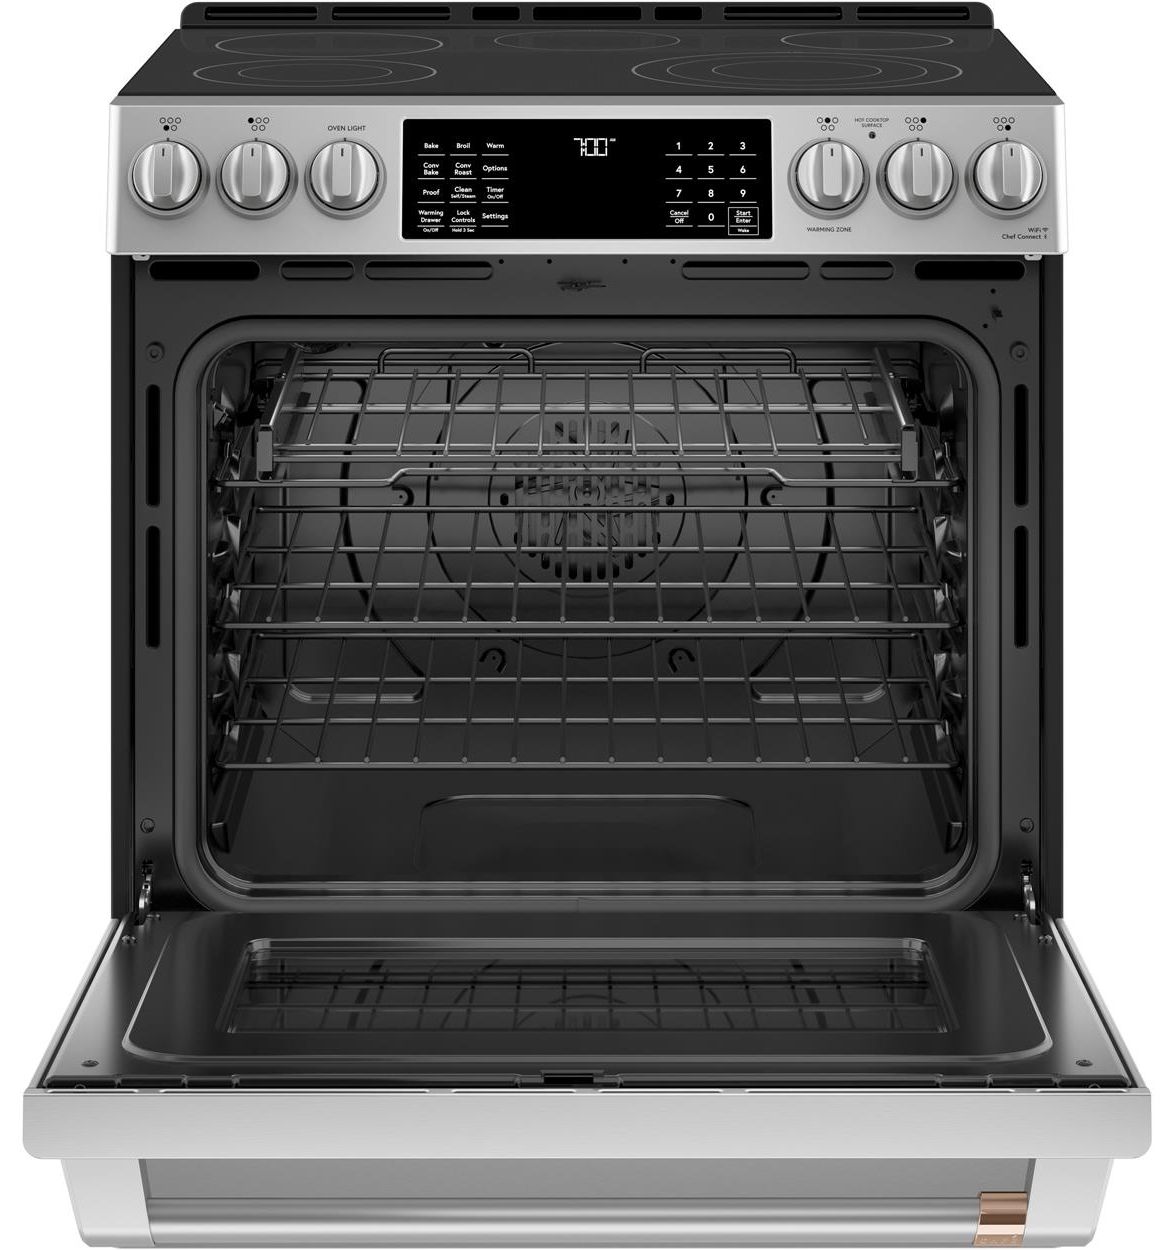 Pro Tips on How to Clean an Electric Stove Top, Albert Lee